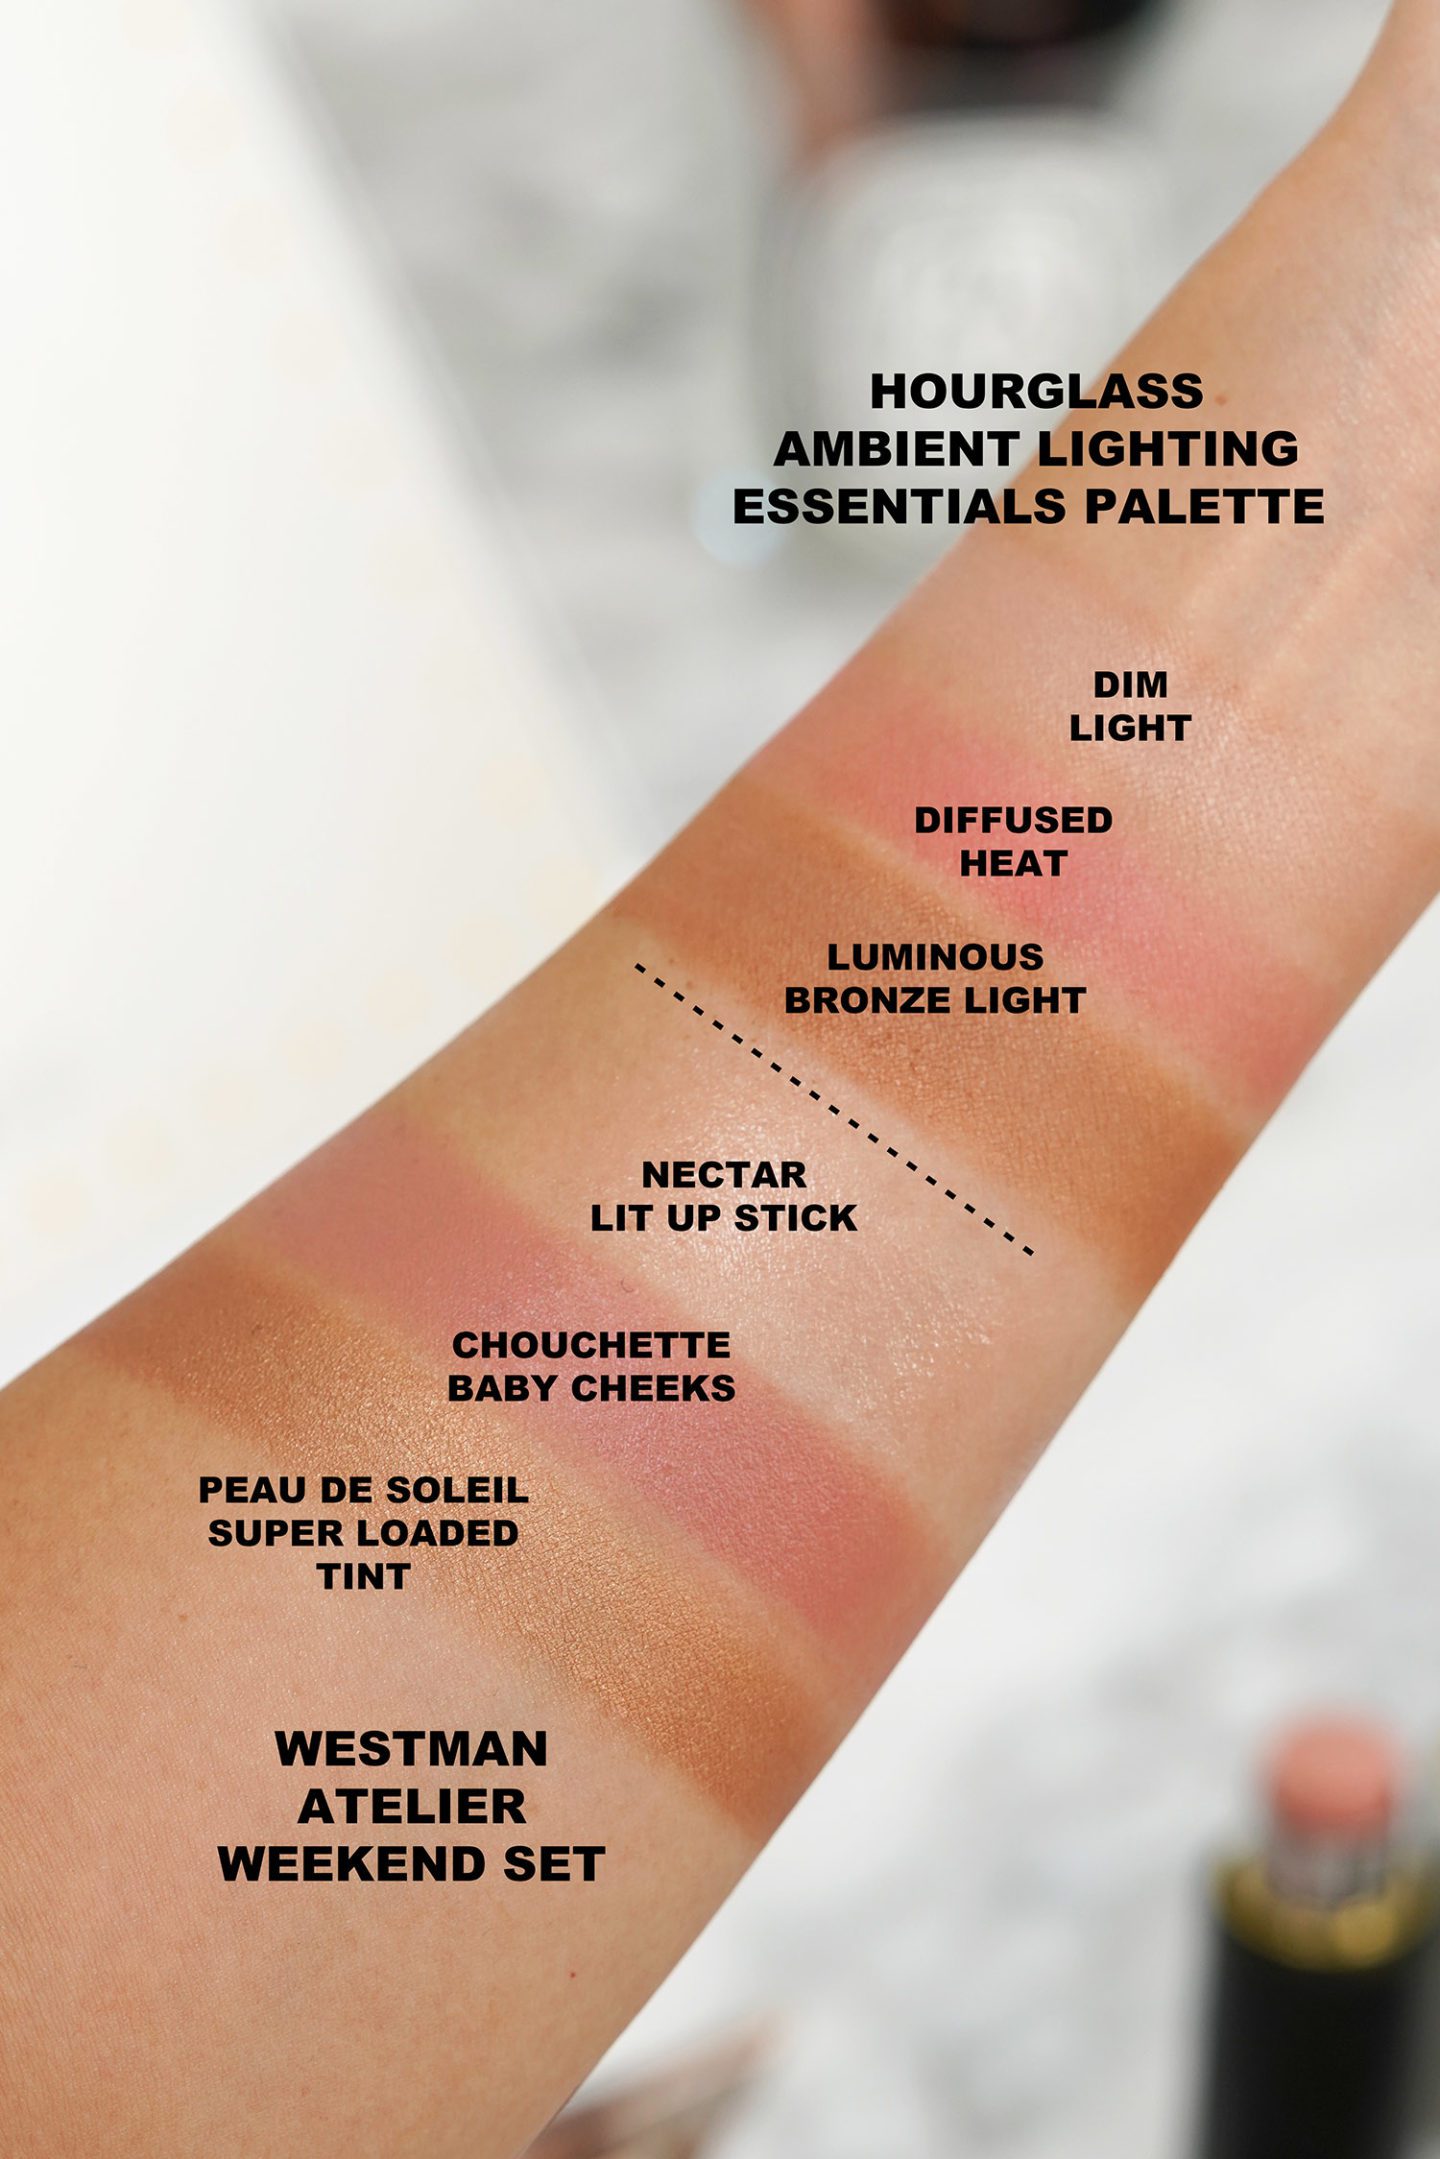 Hourglass and Westman Atelier swatches